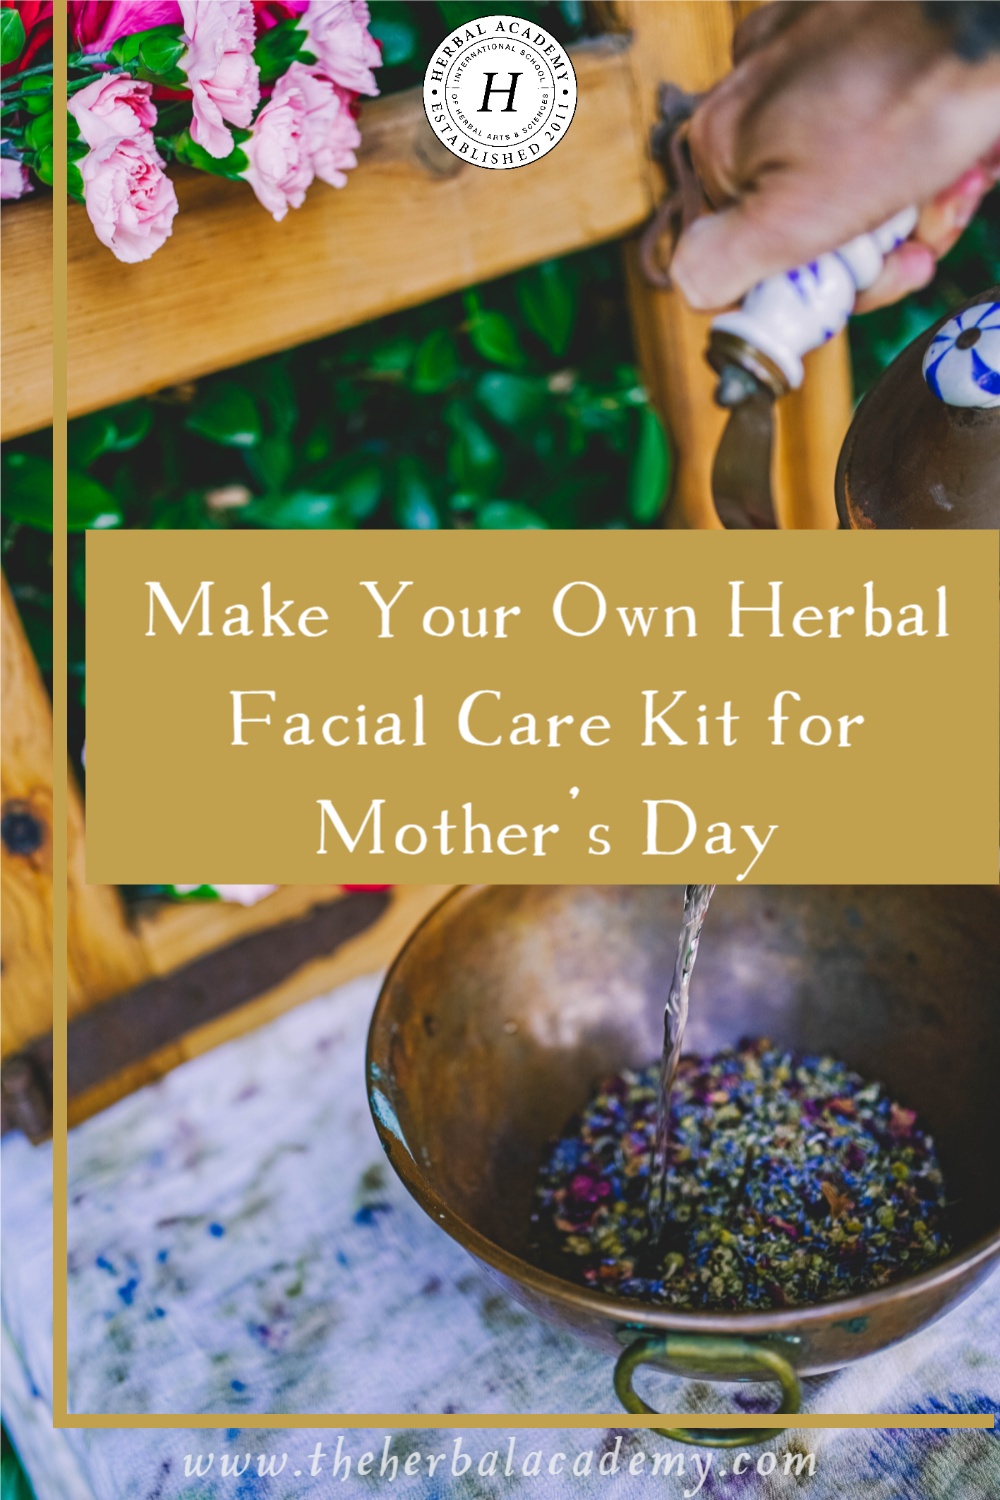 Make Your Own Herbal Facial Care Kit for Mother’s Day | Herbal Academy | This beautiful floral-inspired facial care kit is a perfect way to make time for yourself or to give as a Mother’s Day gift.